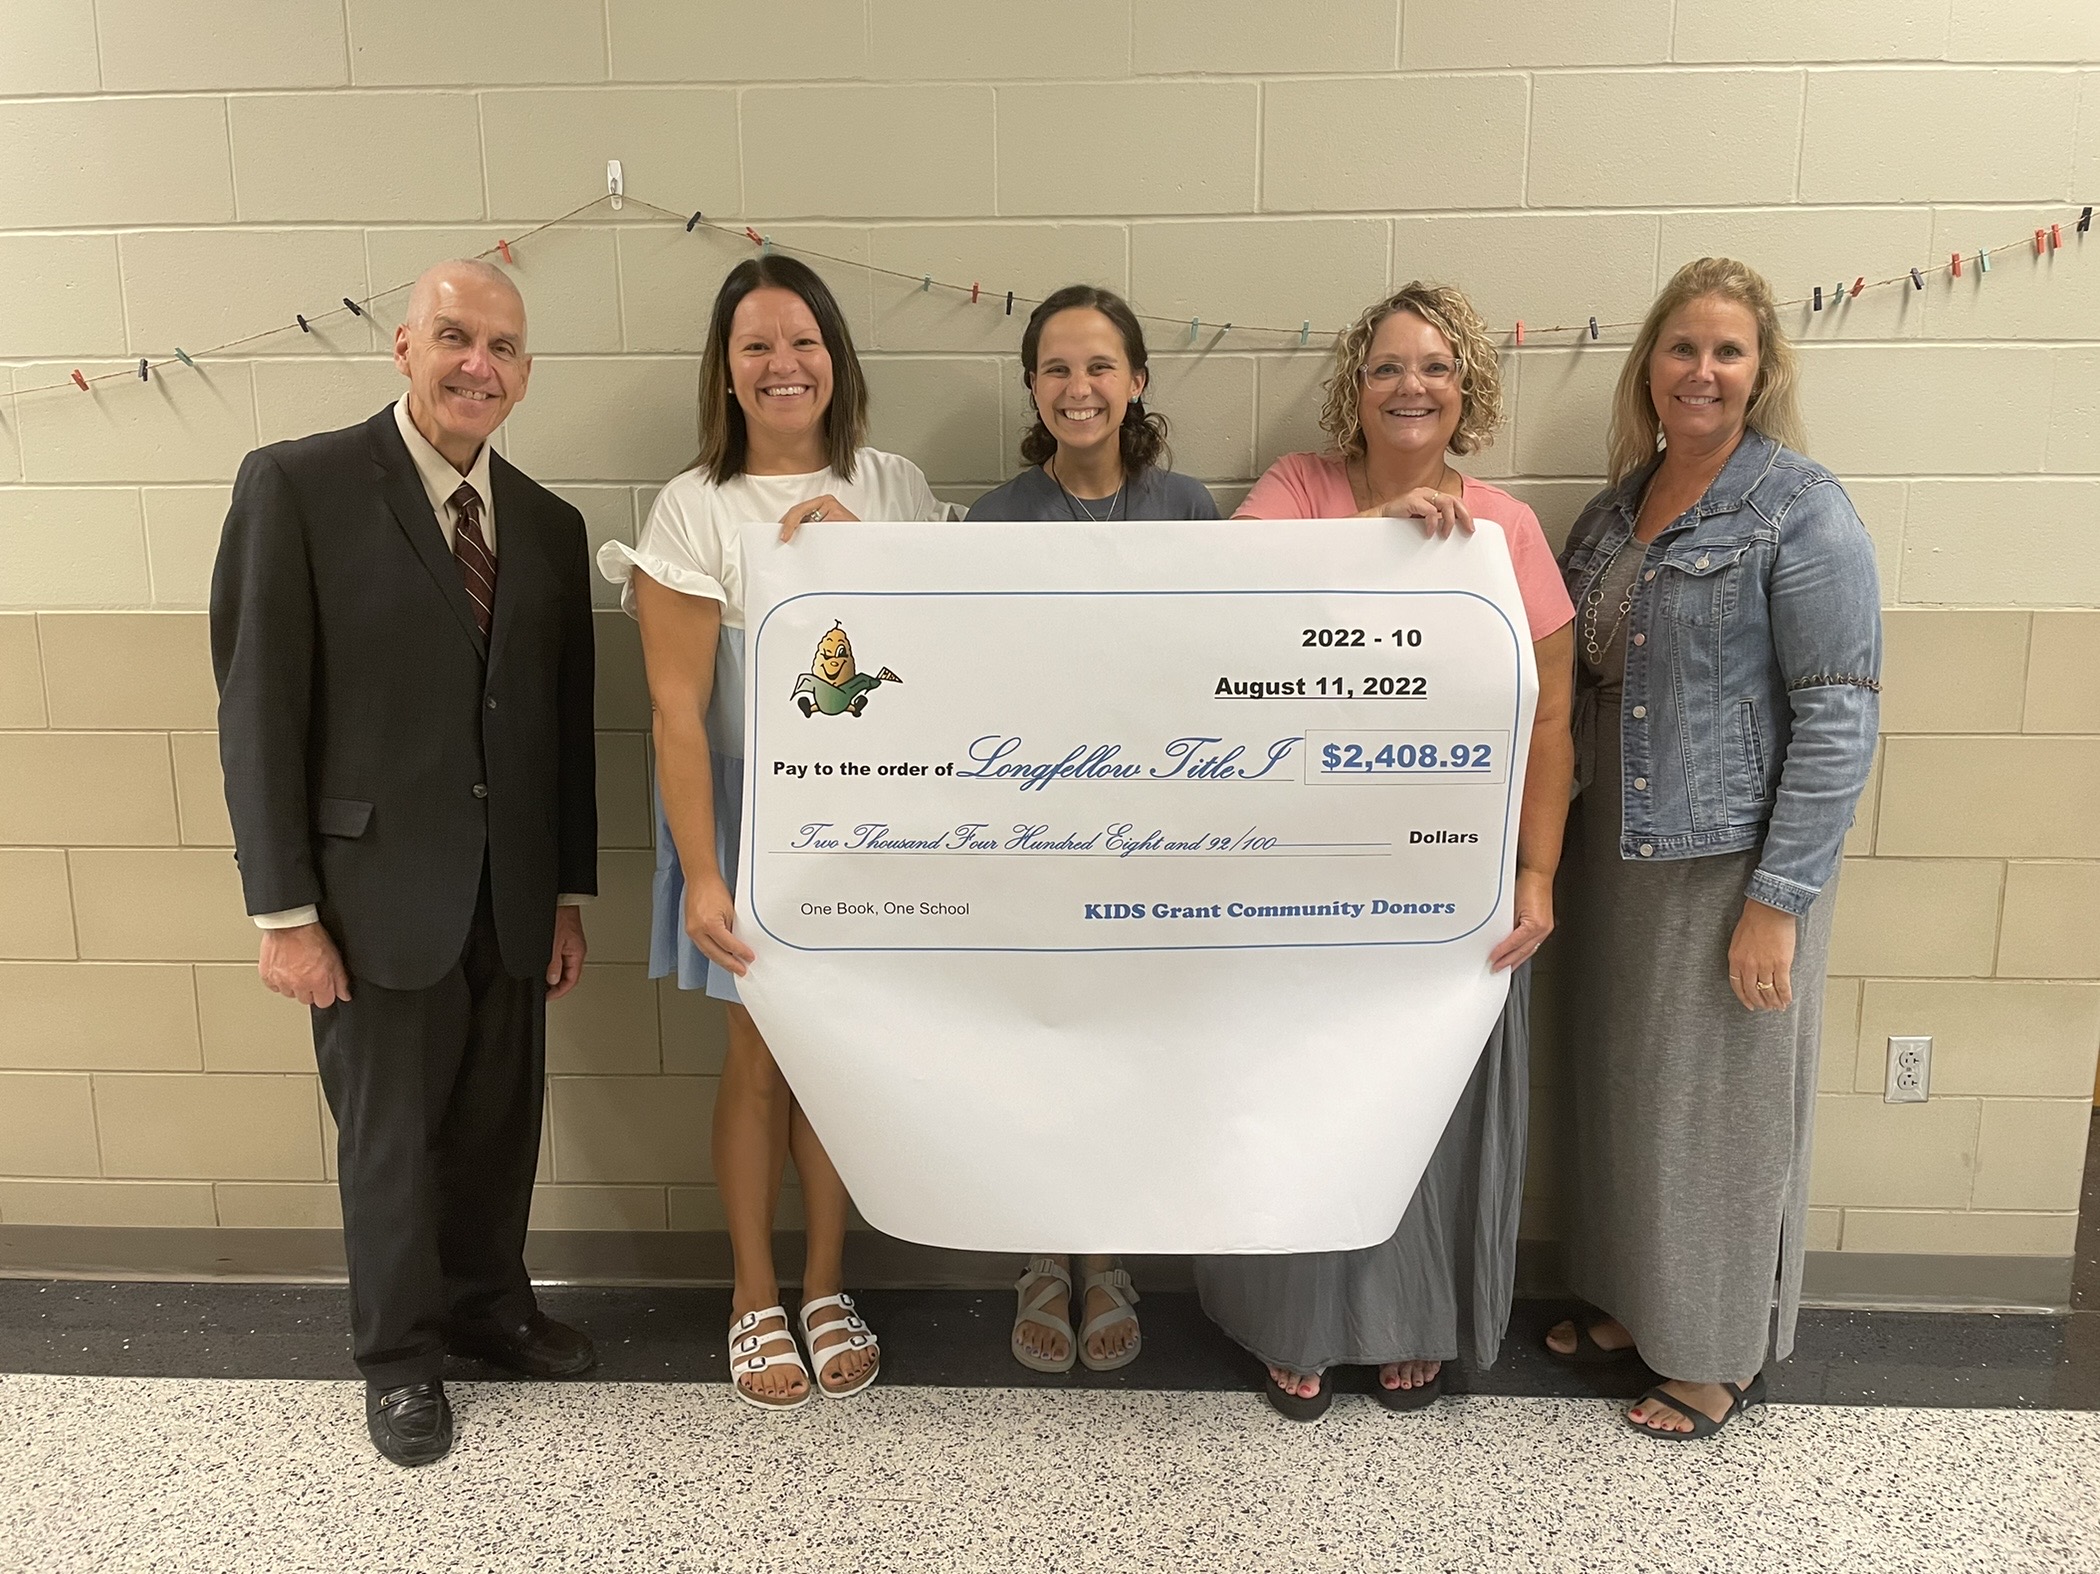 Mitchell teachers secure KIDS grant funding for innovative projects in the new school year